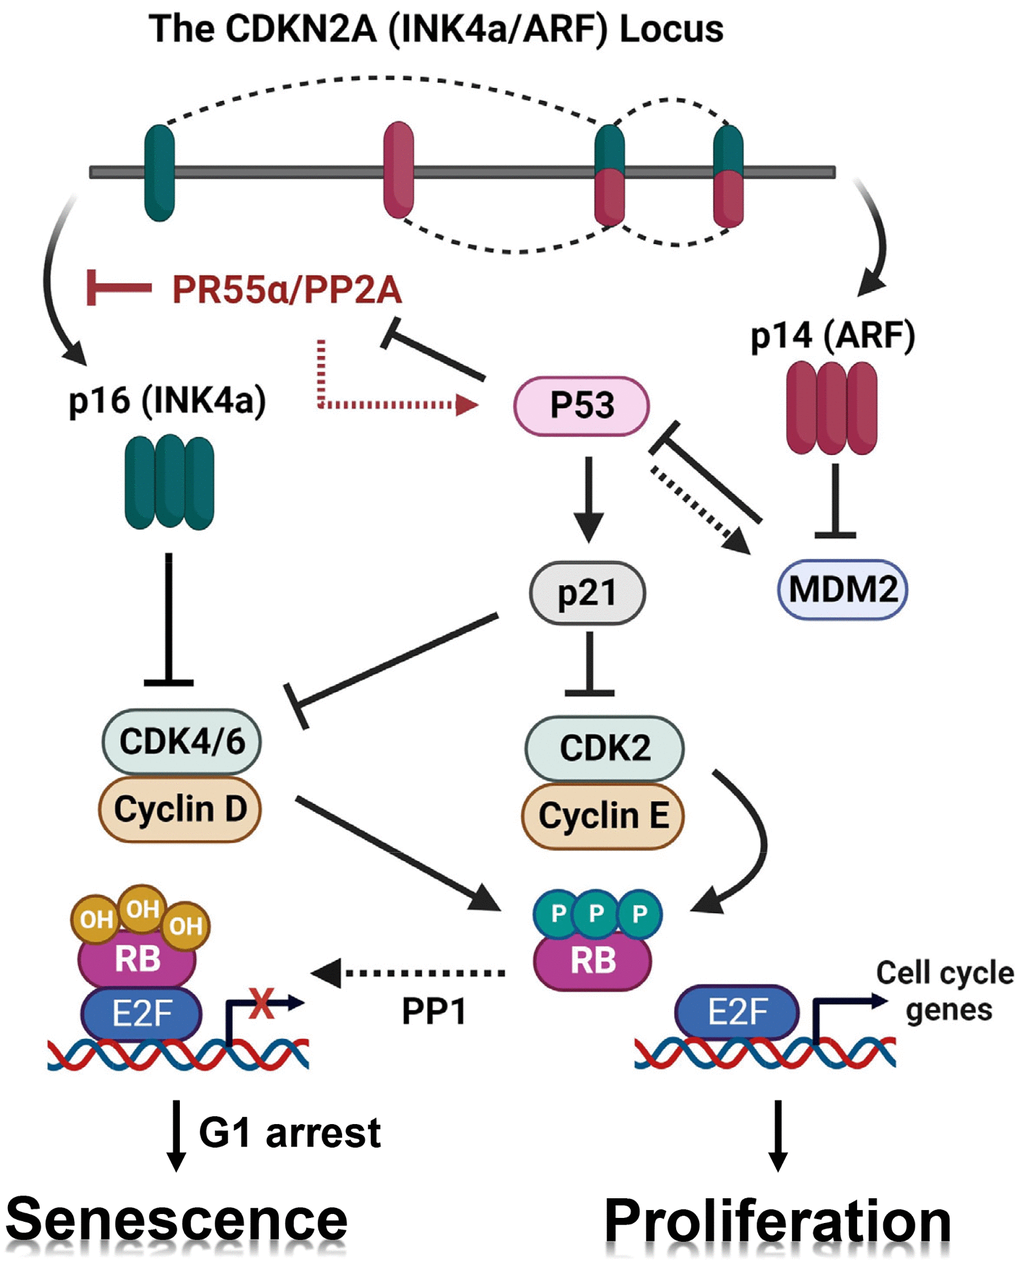 Working model for the regulation of the p16/RB pathway and senescence induction by PR55α. Black lines depict our current understanding of the respective roles of the p16/RB and p53/p21 pathways in the promotion of cellular senescence in response to genotoxic stressors [83, 84]. The CDKN2A locus produces both the p16 (INK4a) and p14 (ARF) proteins using both separate promoters and alternative splicing. The p16 protein blocks the CDK4/6 kinases leading to RB activation, which is required for G1 cell cycle arrest and senescence induction. The p14 protein stabilizes p53 by inhibiting the MDM2 E3 ubiquitin ligase, resulting in p21 (a p53 target gene) induction and subsequent inhibition of CDK2 and CDK4/6, which also leads to RB activation that promotes G1 cell cycle arrest and senescence. We have previously reported that p53 negatively regulates PR55α protein stability [28]. However, the p53 mutational status had no detectable impact on the effects of PR55α on the expression of p16 and induction of senescence by IR. Red lines depict novel findings presented in this report: (1) PR55α-controlled PP2A enhances IR-induced p53/p21 signaling and (2) PR55α inhibits p16 transcription independently of p53 function.